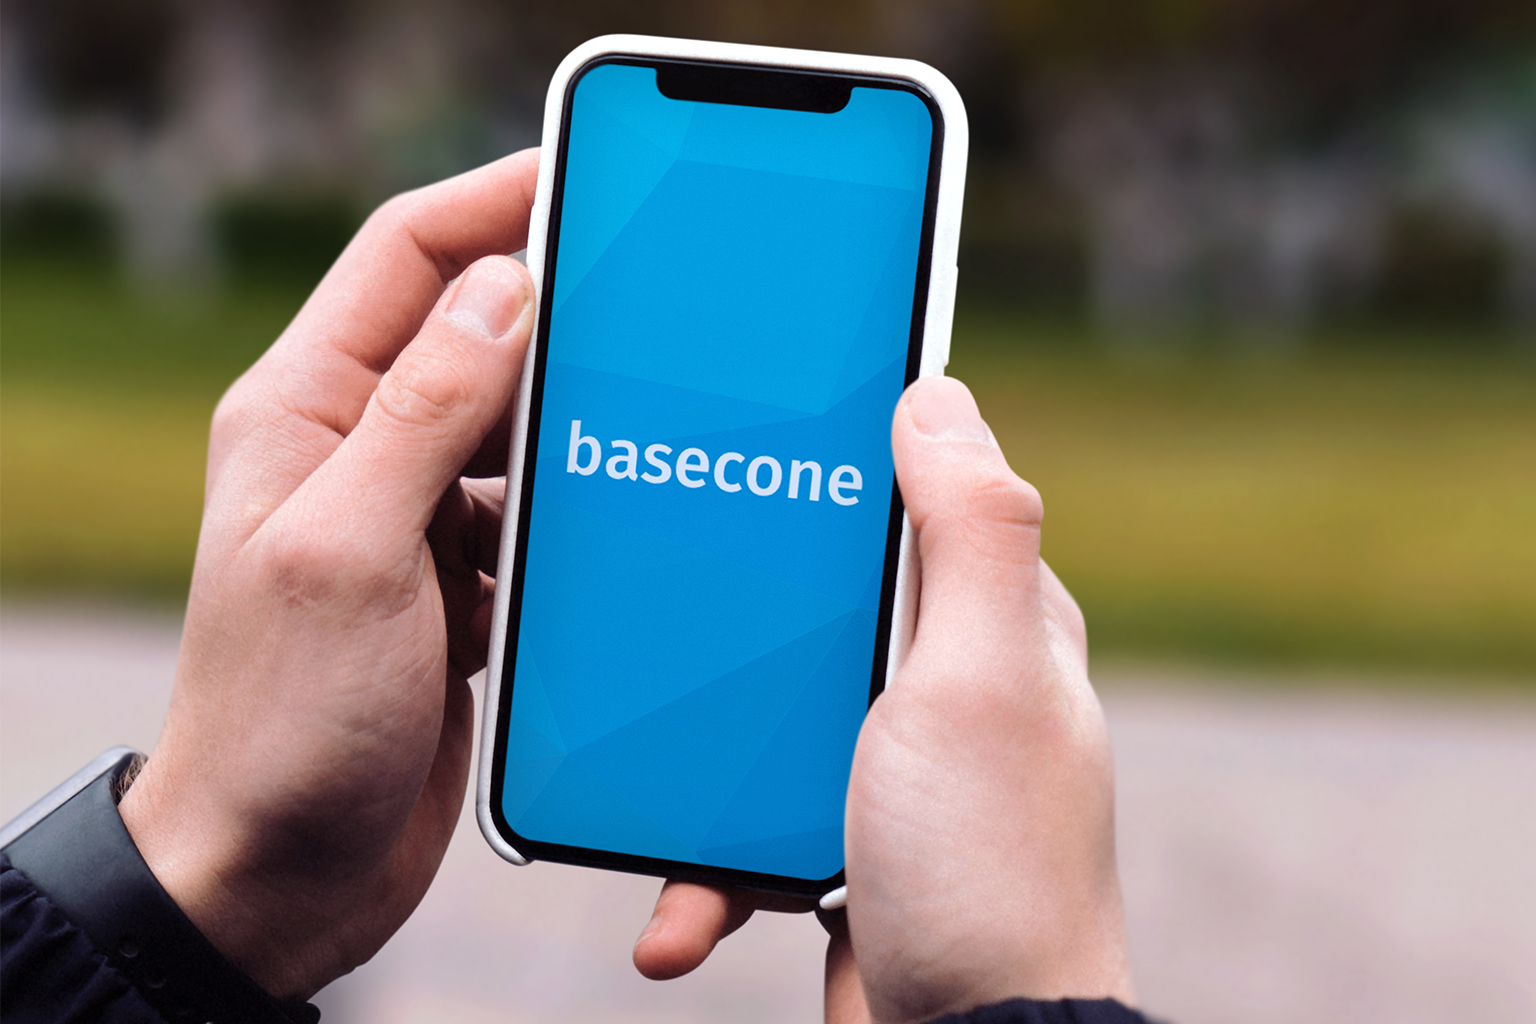 the Basecone app